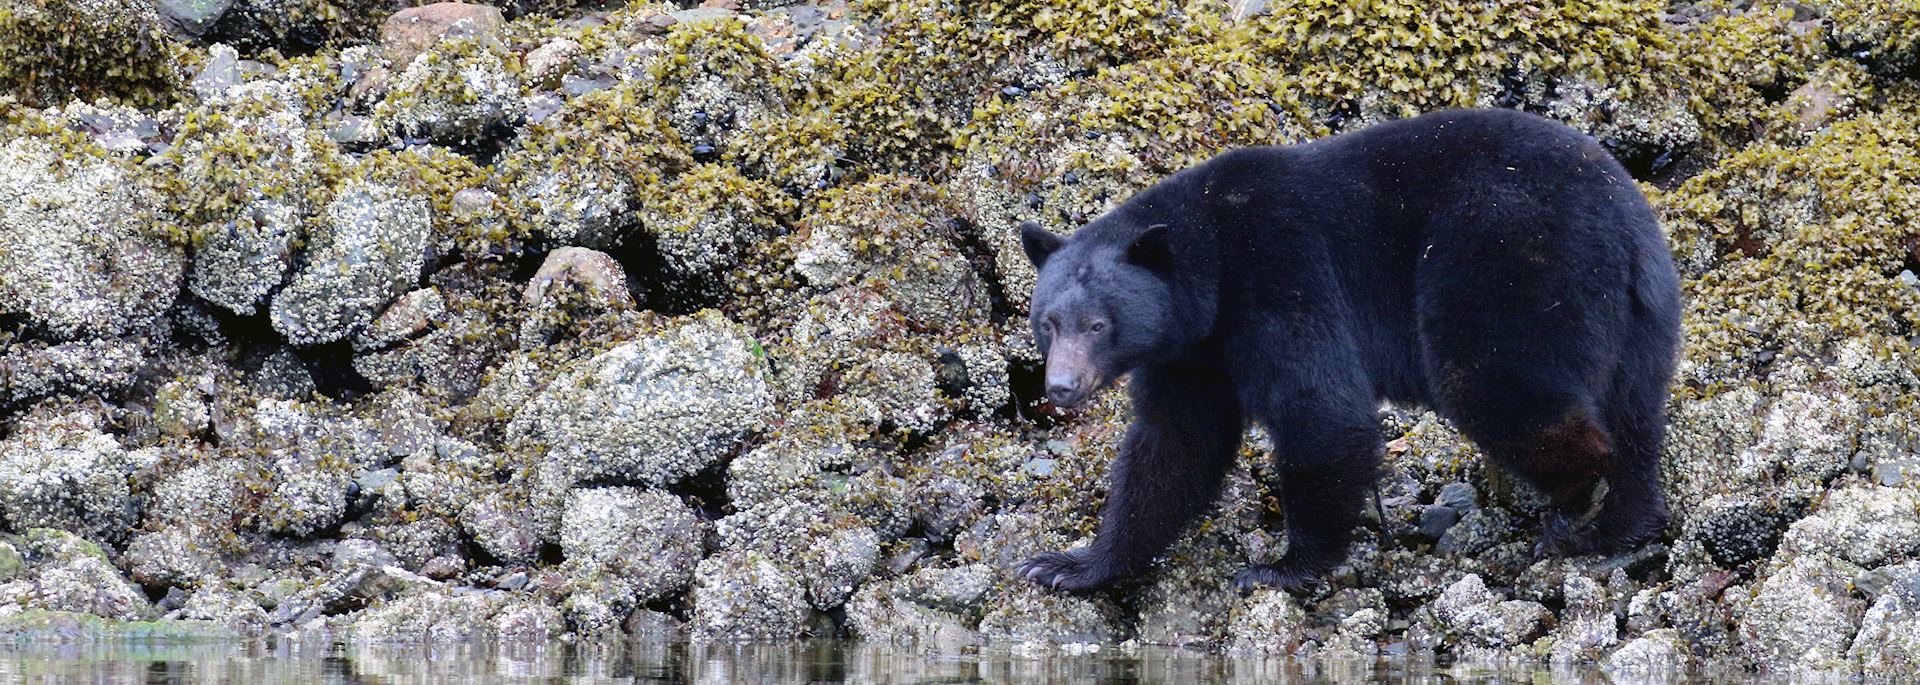 Black bear in Clayoquot Sound